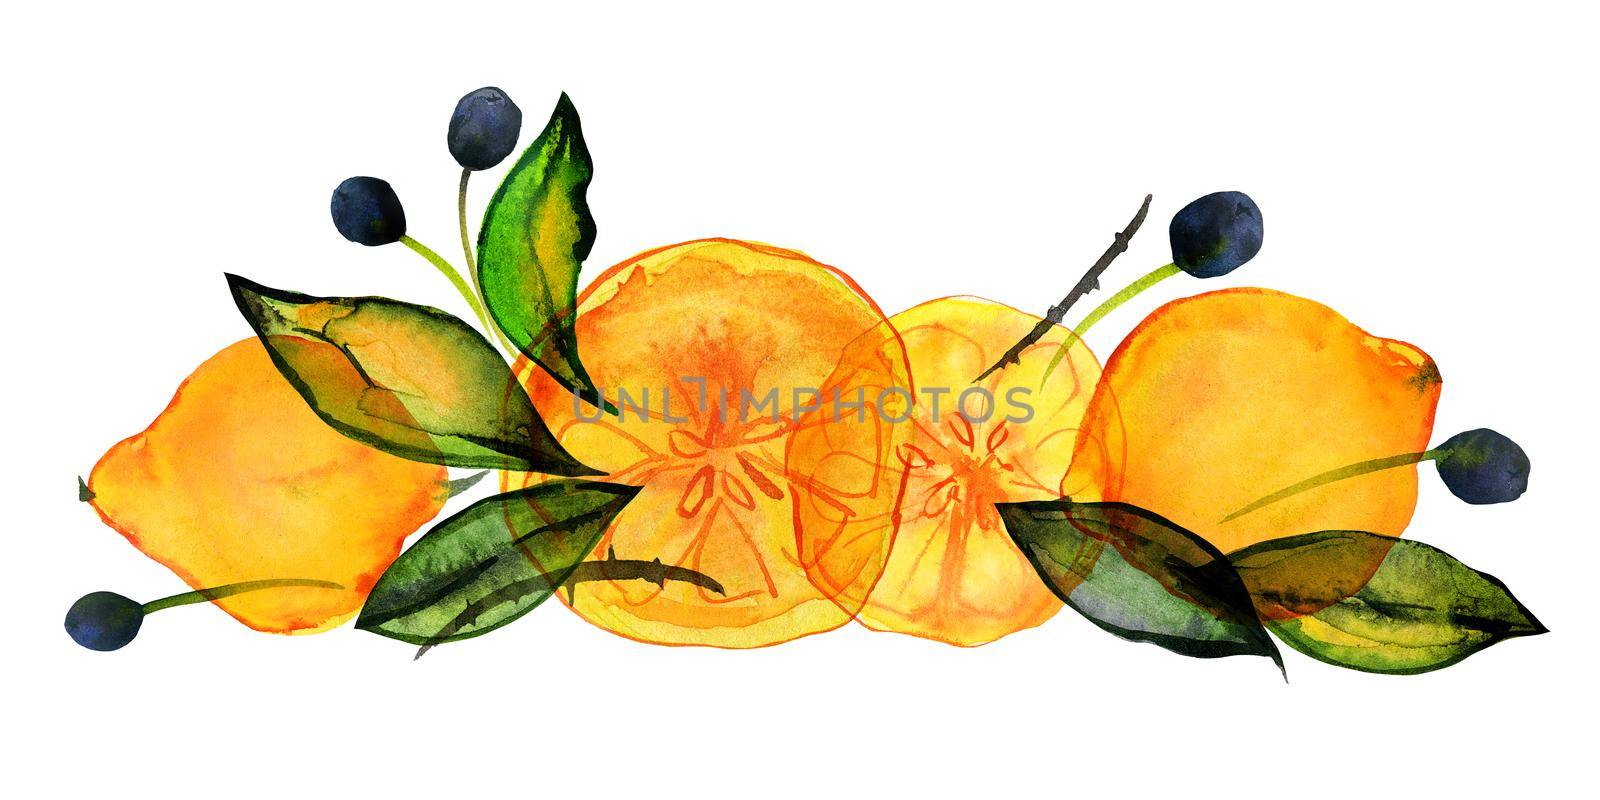 Citrus and olive fruits garden. Lemons and olives bouquet with hand drawn watercolor. Cute decor for home and cafe textiles, for packaging decor and menu